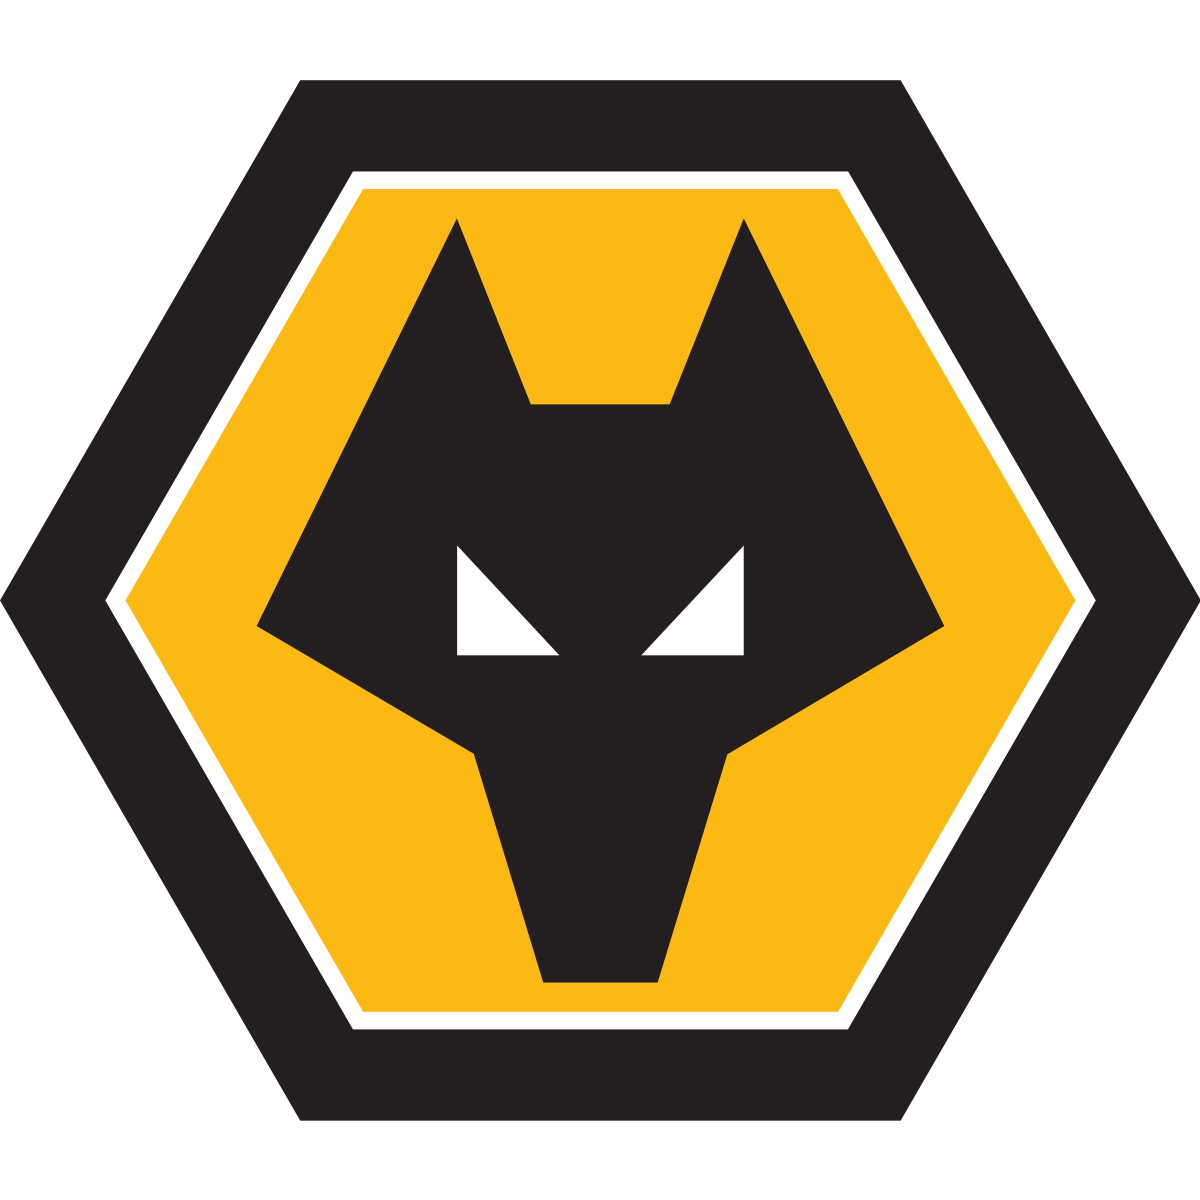 News update Wolverhampton put up outstanding performance and later hit with sad news on top player